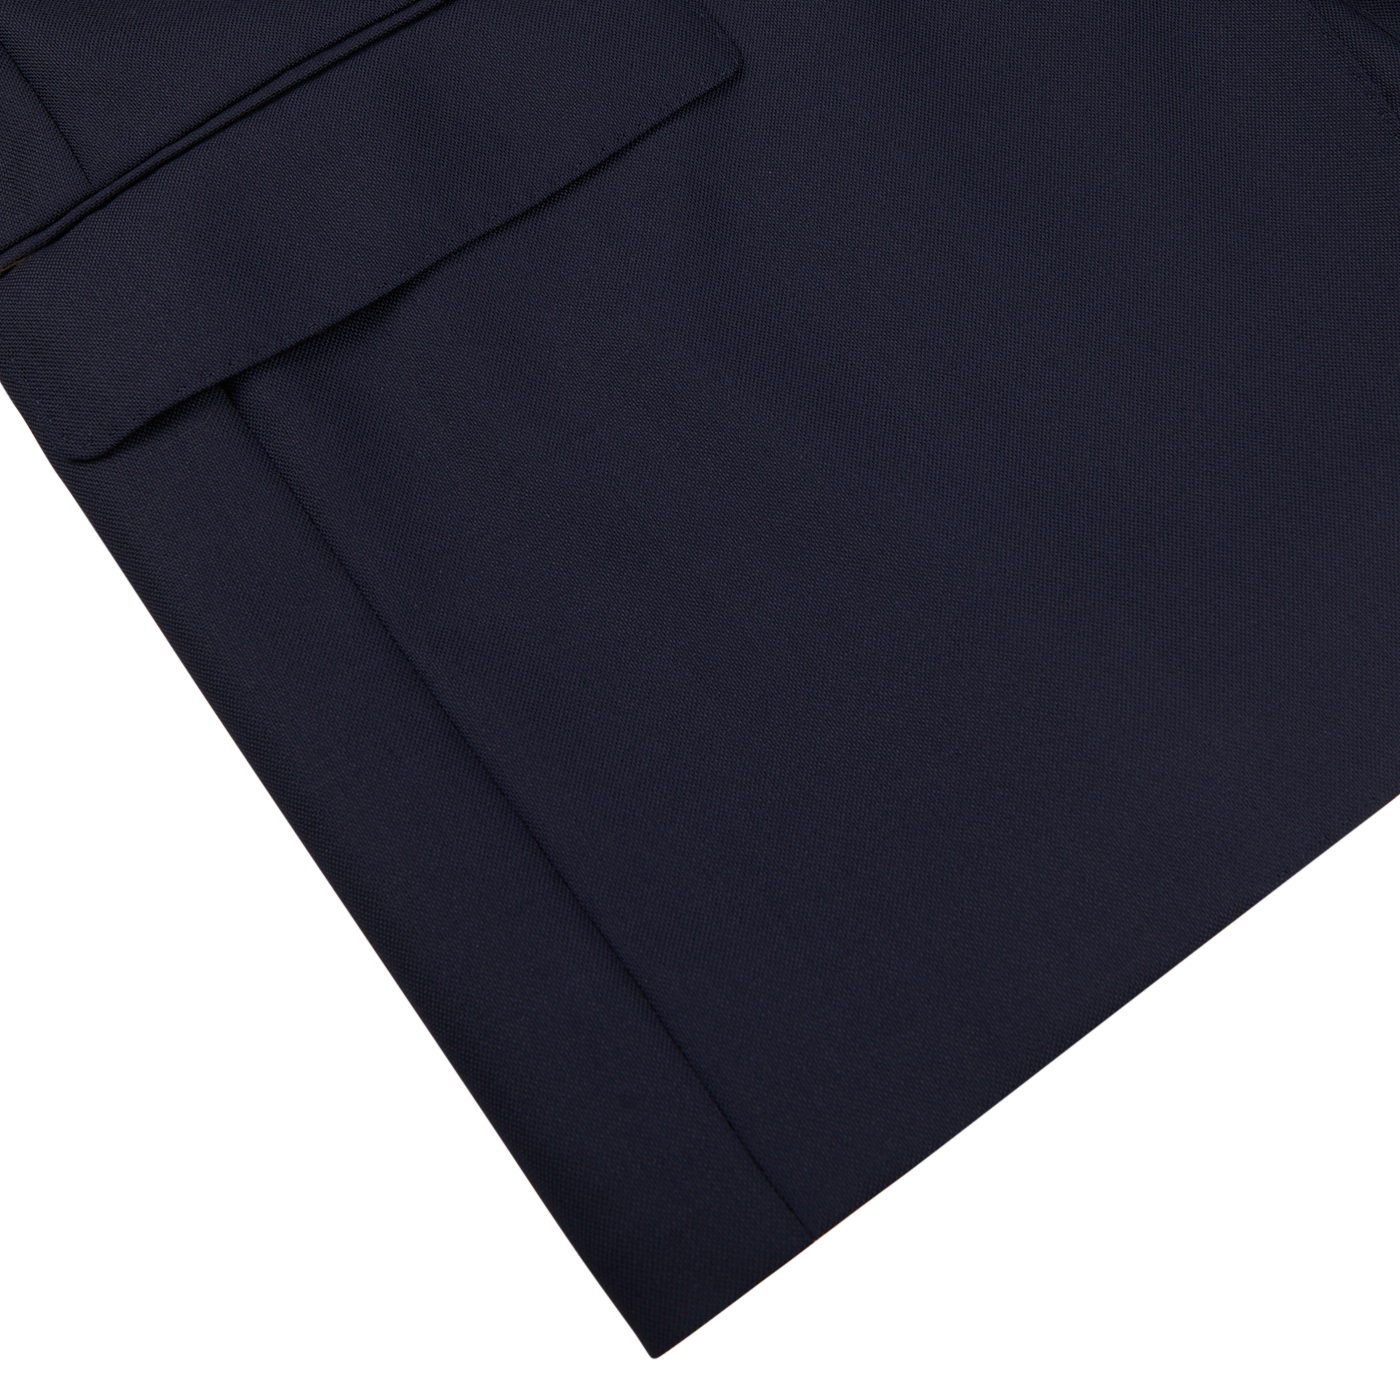 Close-up of a Baltzar Sartorial navy Super 100's wool suit jacket, with a visible folded pocket detail on a white background.